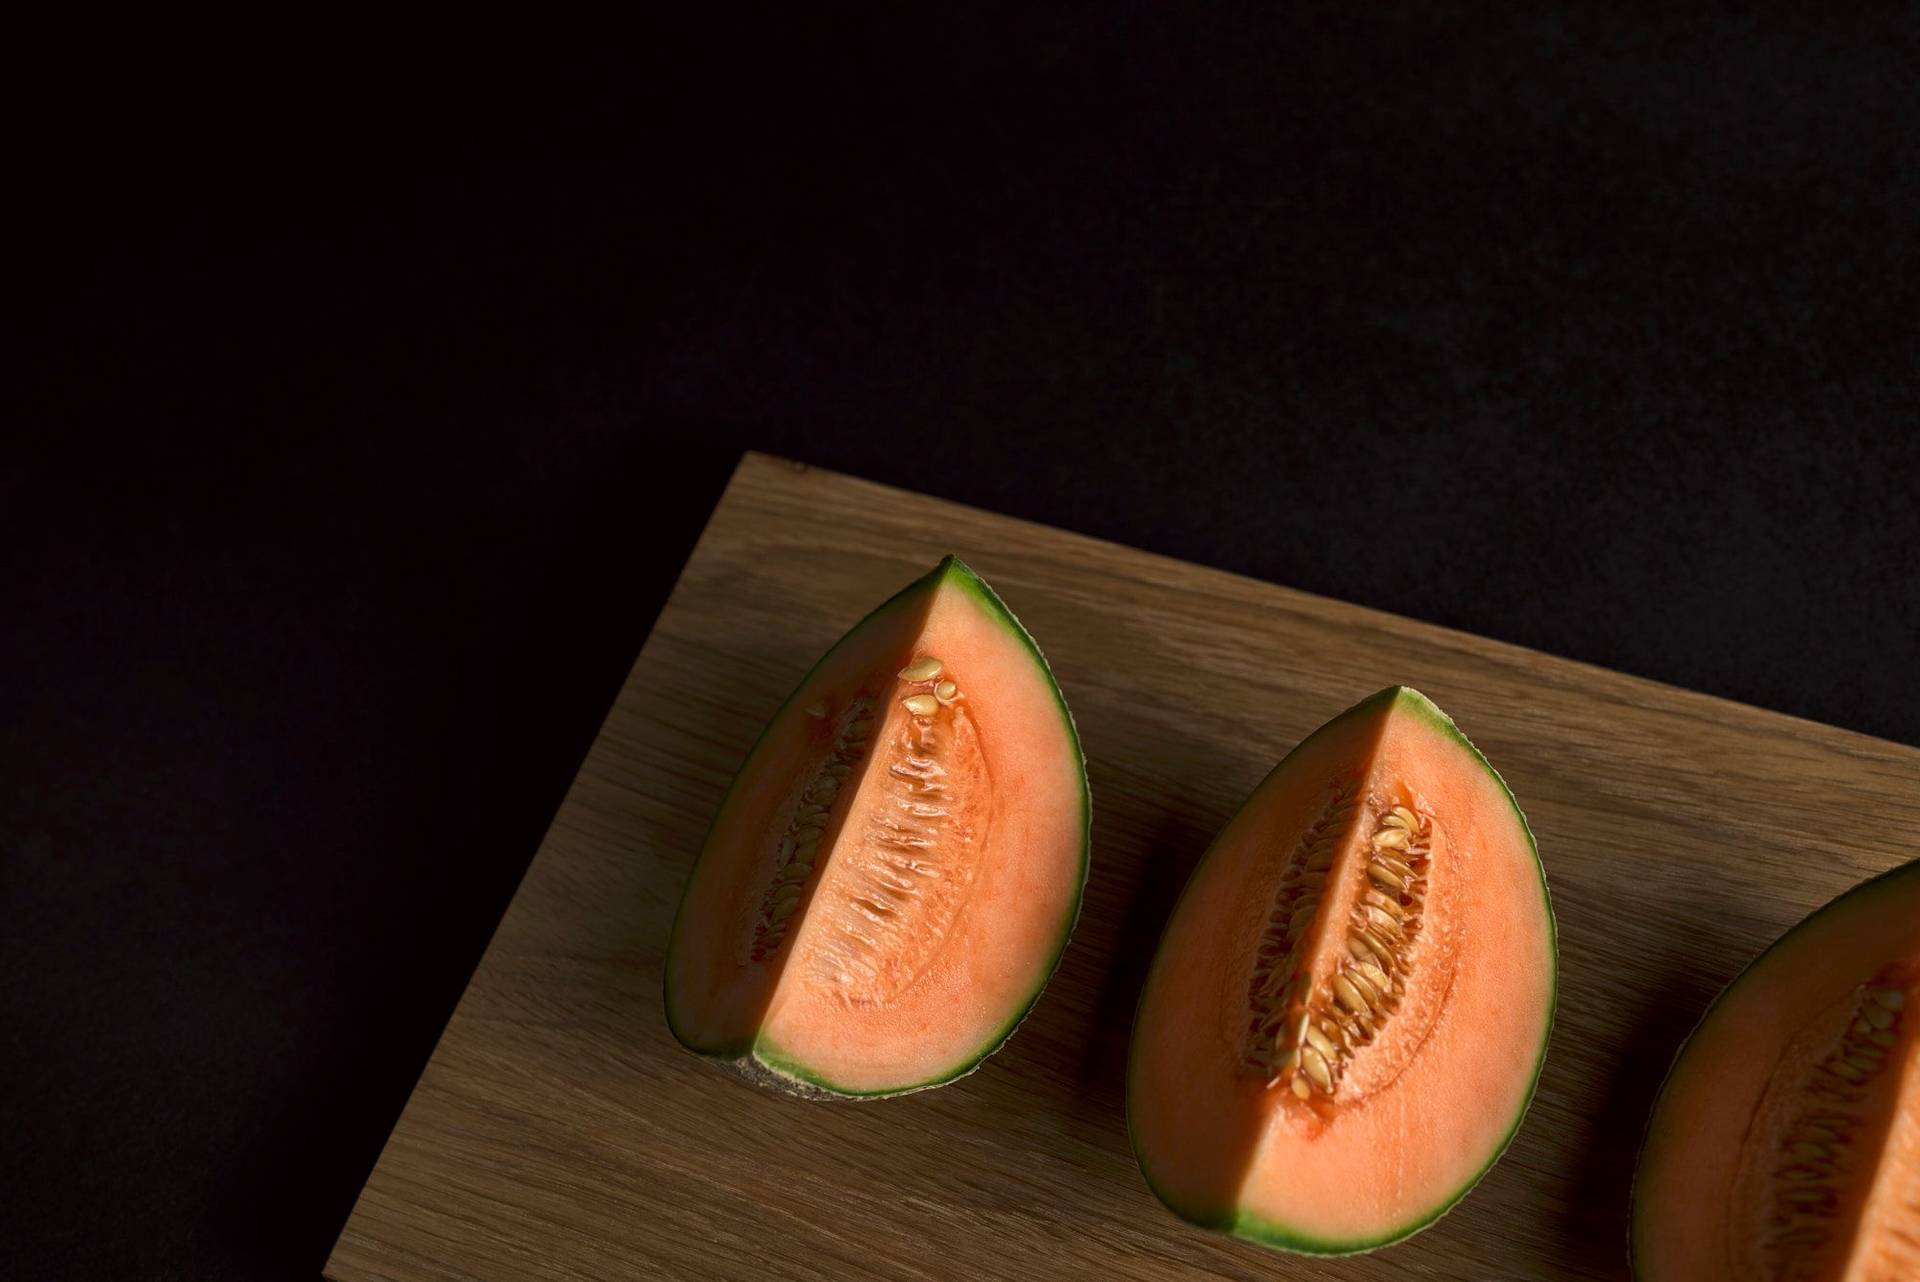 three slices of cantaloupe melon on a wooden board with black background